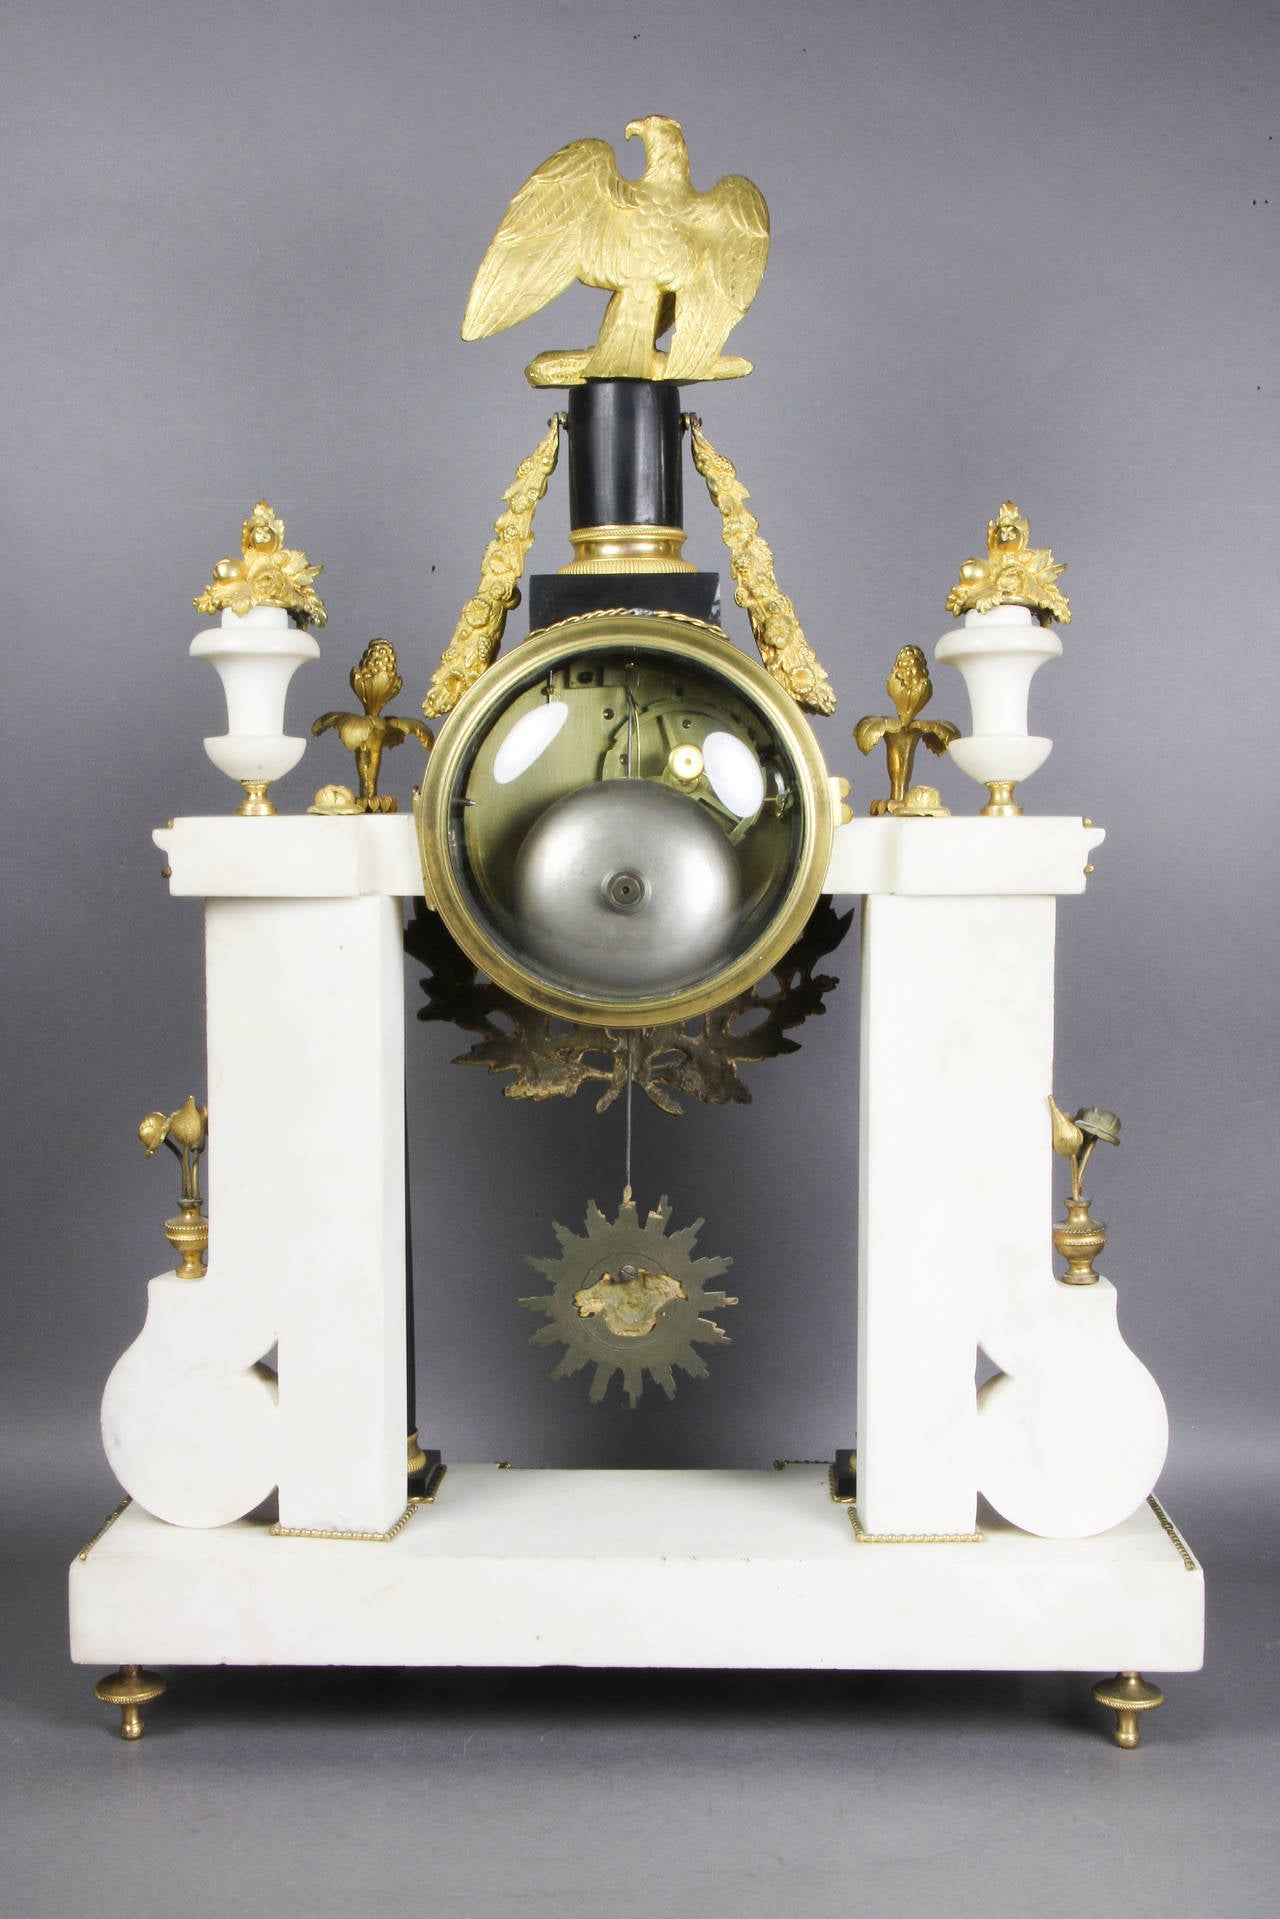 French Late Louis XVI Ormolu-Mounted Black and White Marble Mantle Clock by Furet